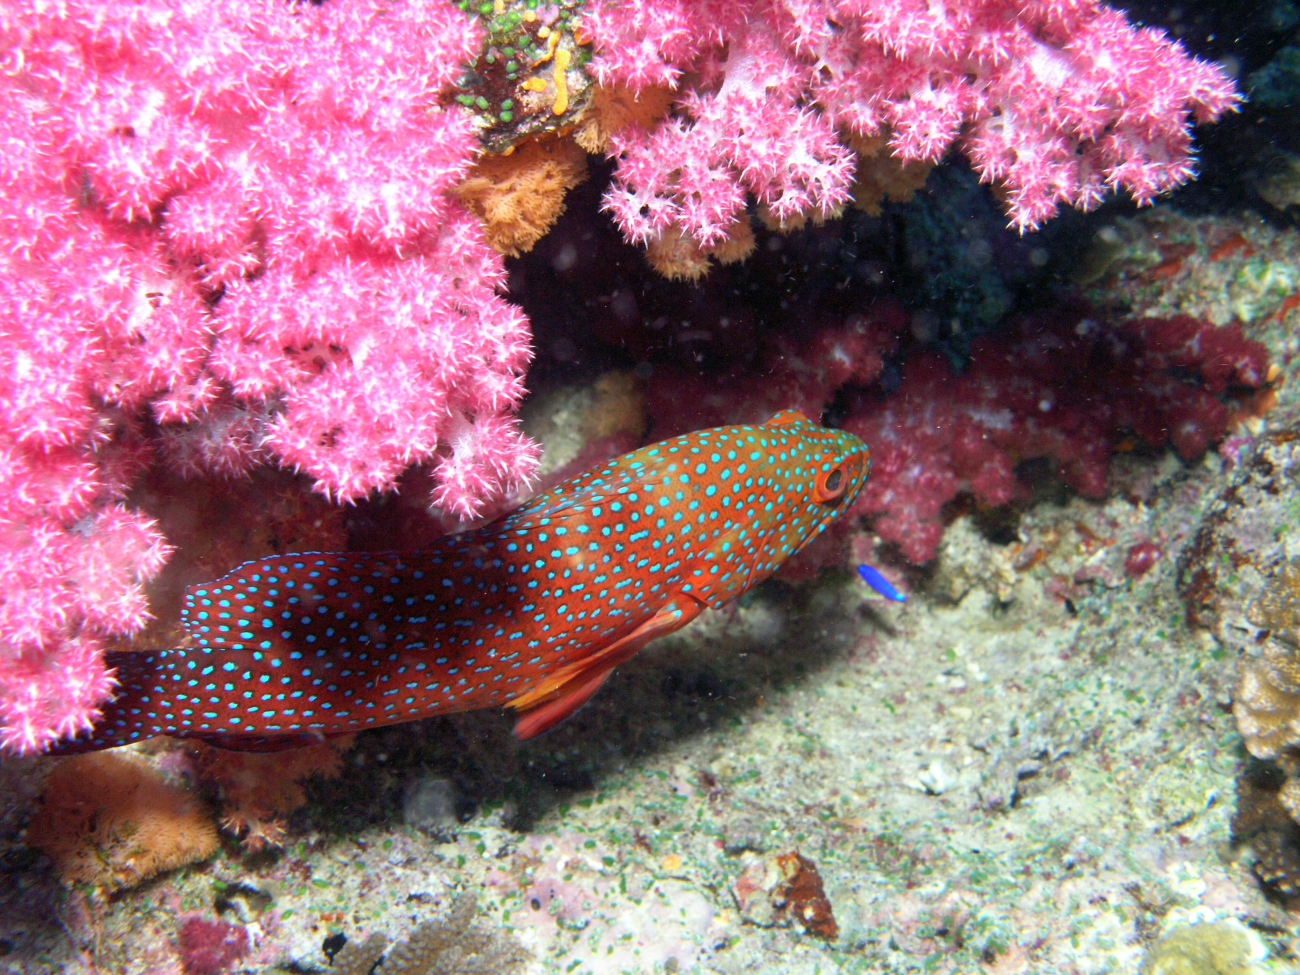 Miniata or grouper seen from above (Cephalopholis miniata) with pinkand red soft coral